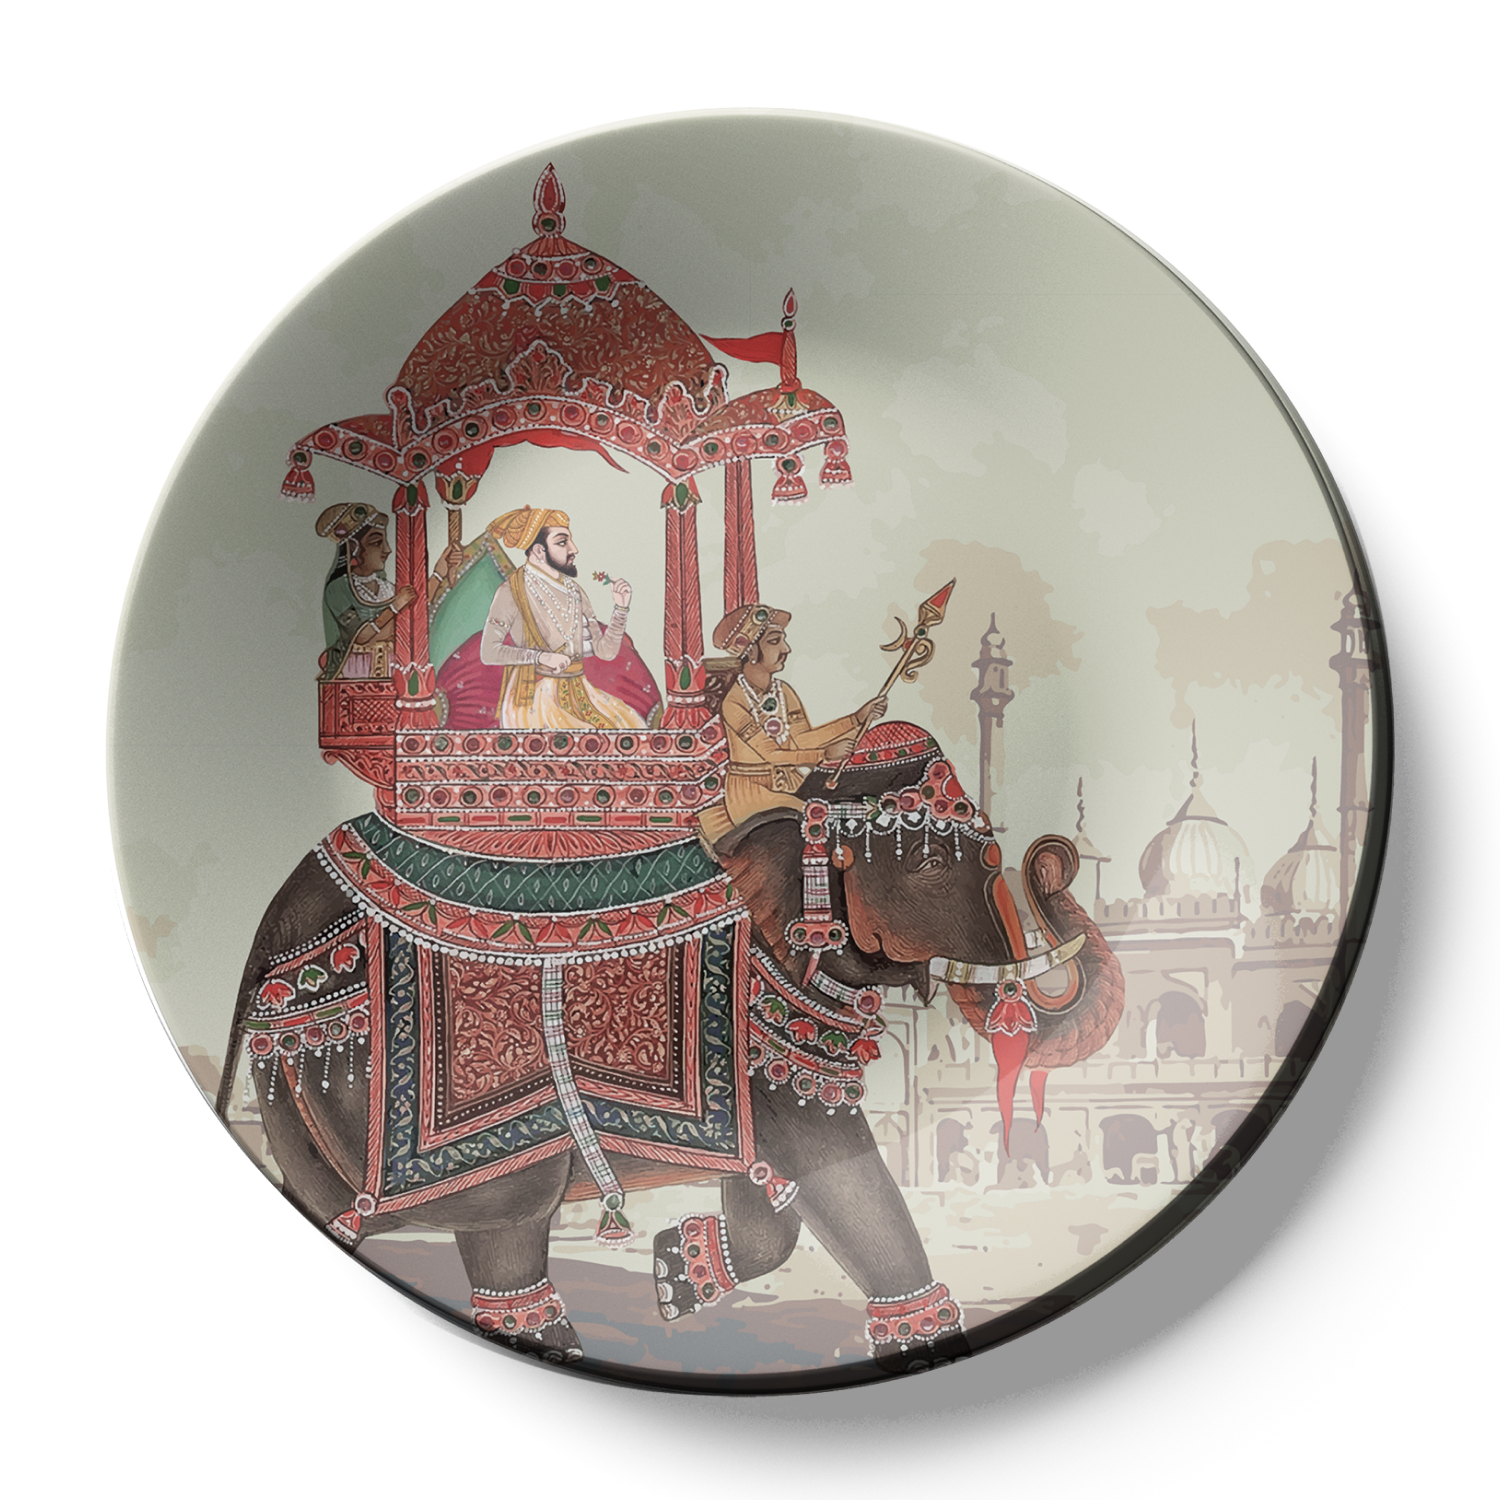 Regal wall plate featuring a king riding a royal elephant for home decor